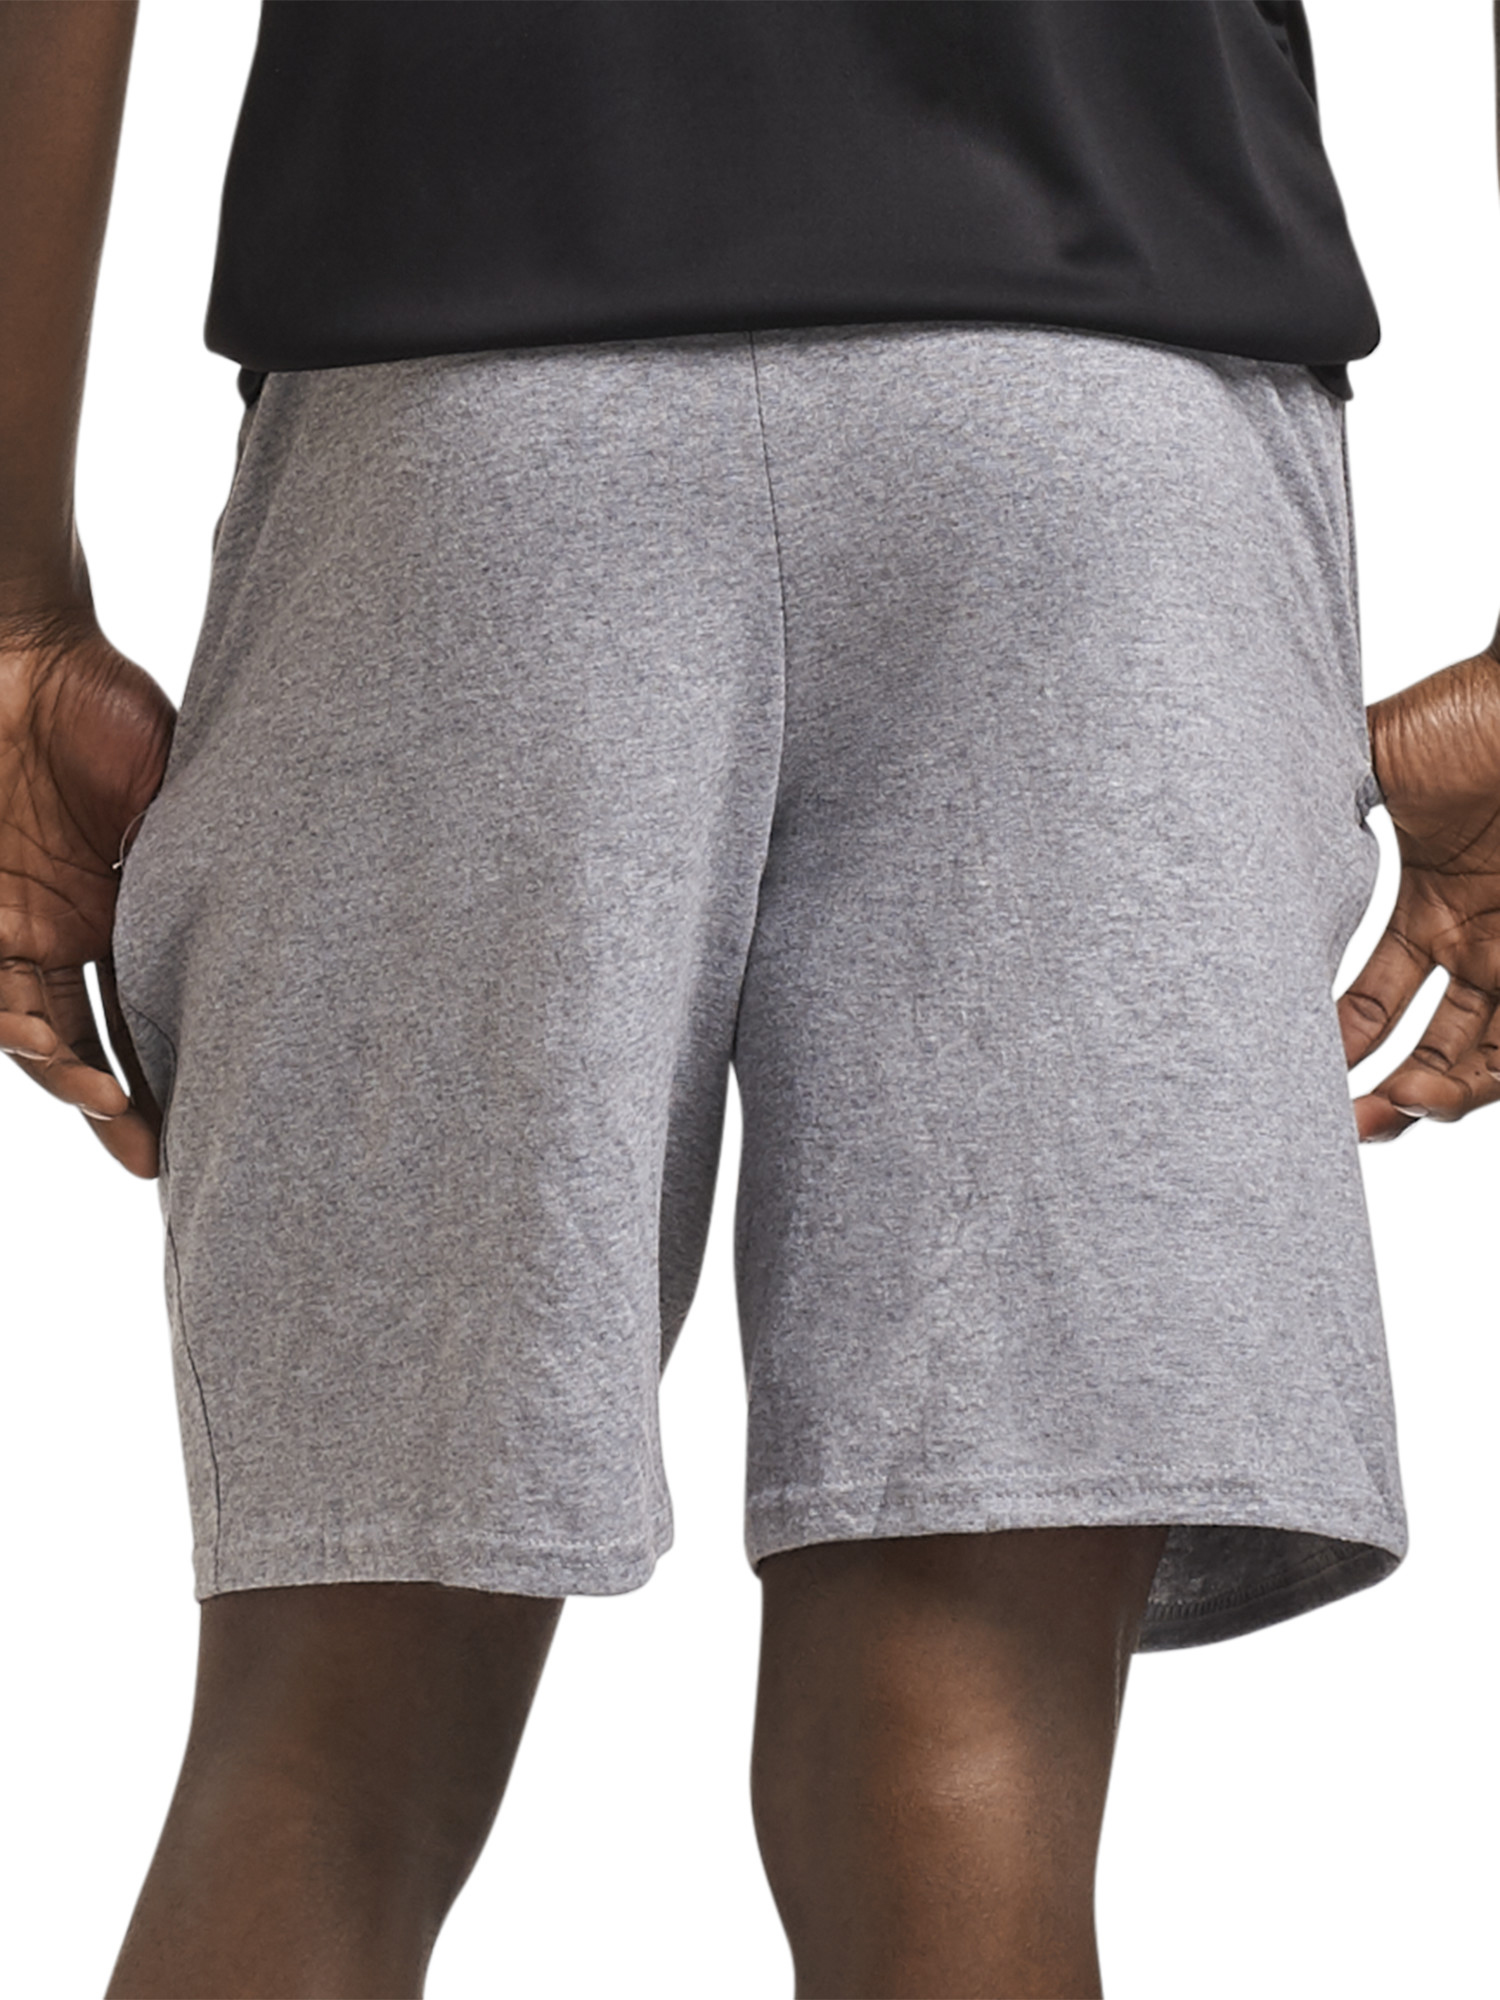 Russell Athletic Men's and Big Men's 9-10" Basic Cotton Pocket Shorts - image 4 of 5